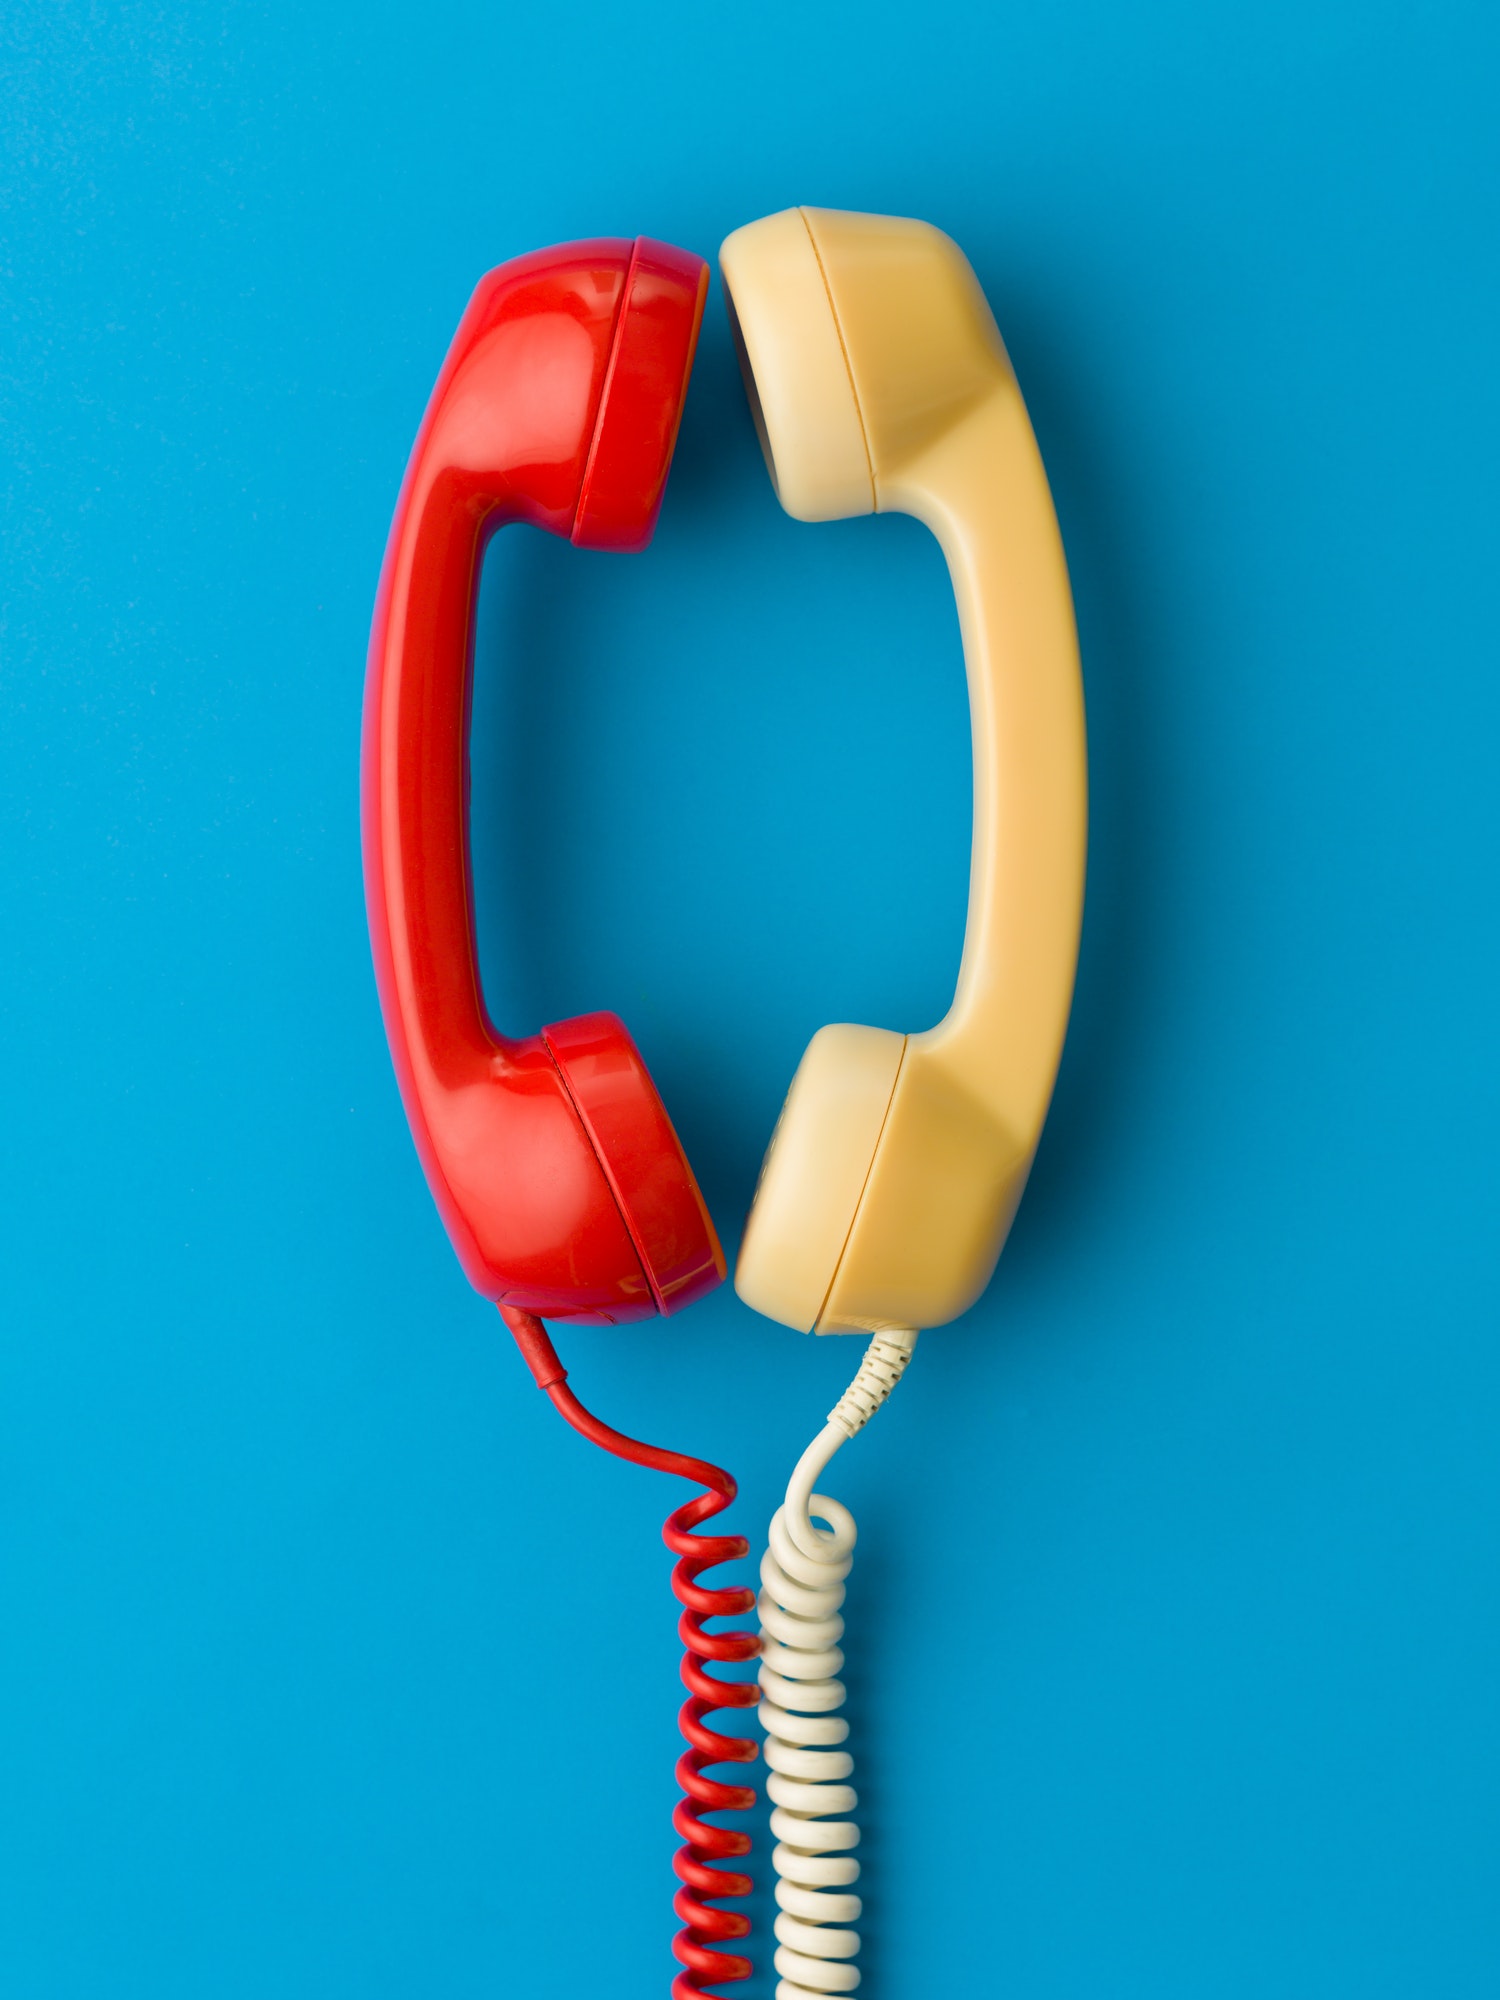 Telephones representing competing messages prove many different marketing strategies work.